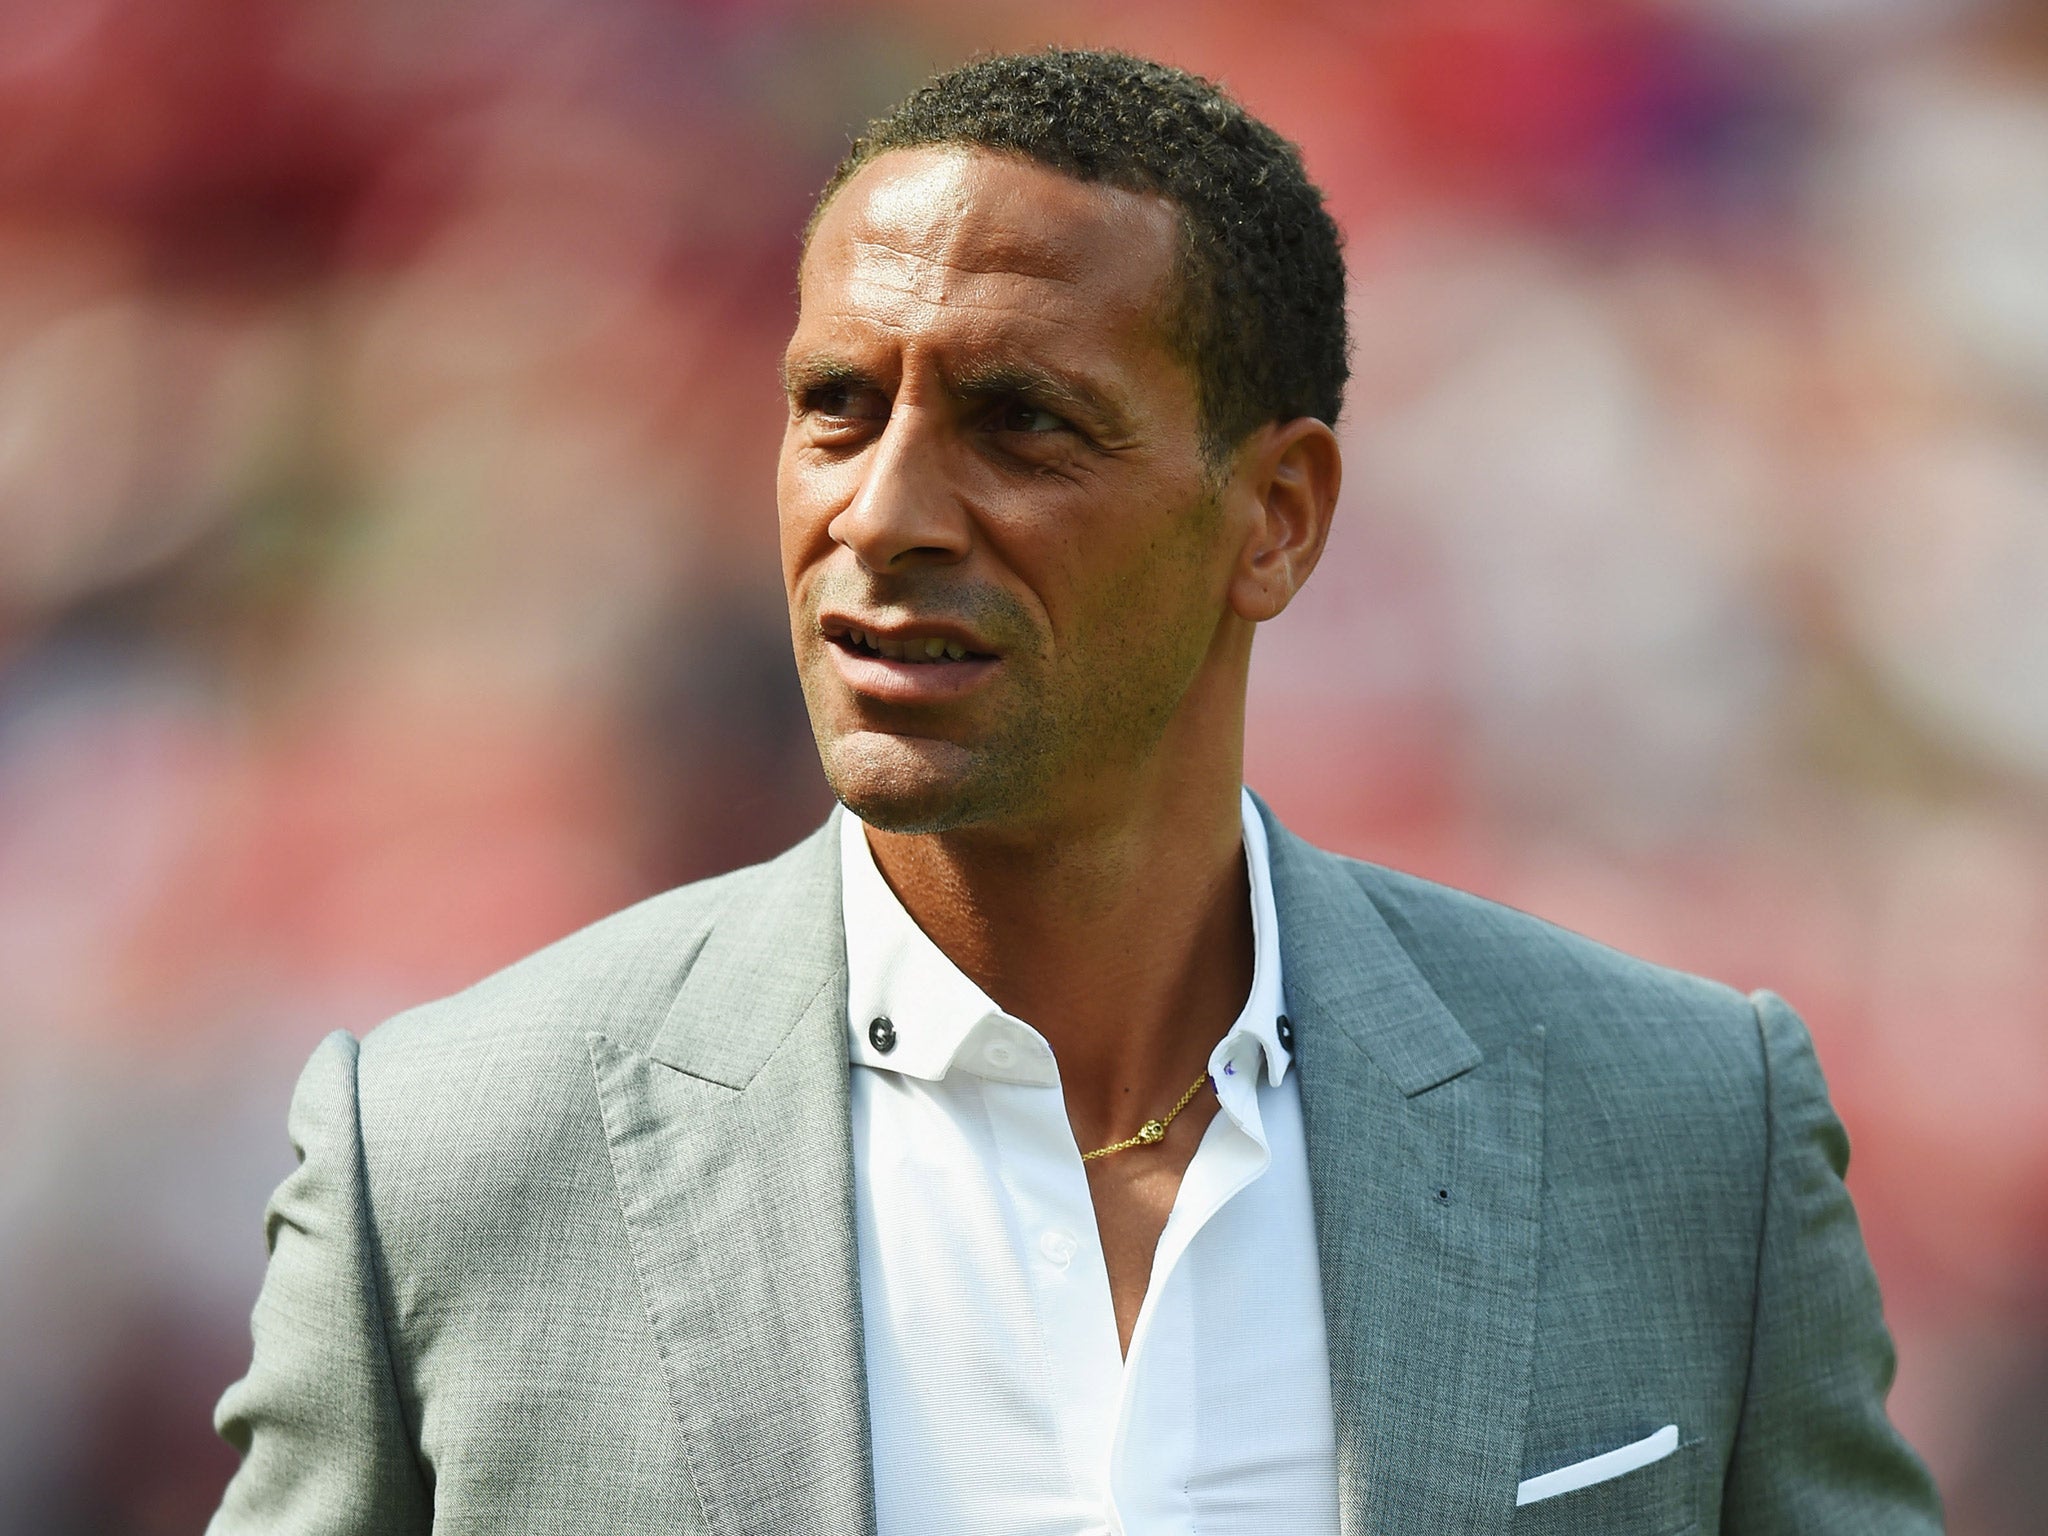 BT Sport pundit Rio Ferdinand has questioned what 'world class' really means